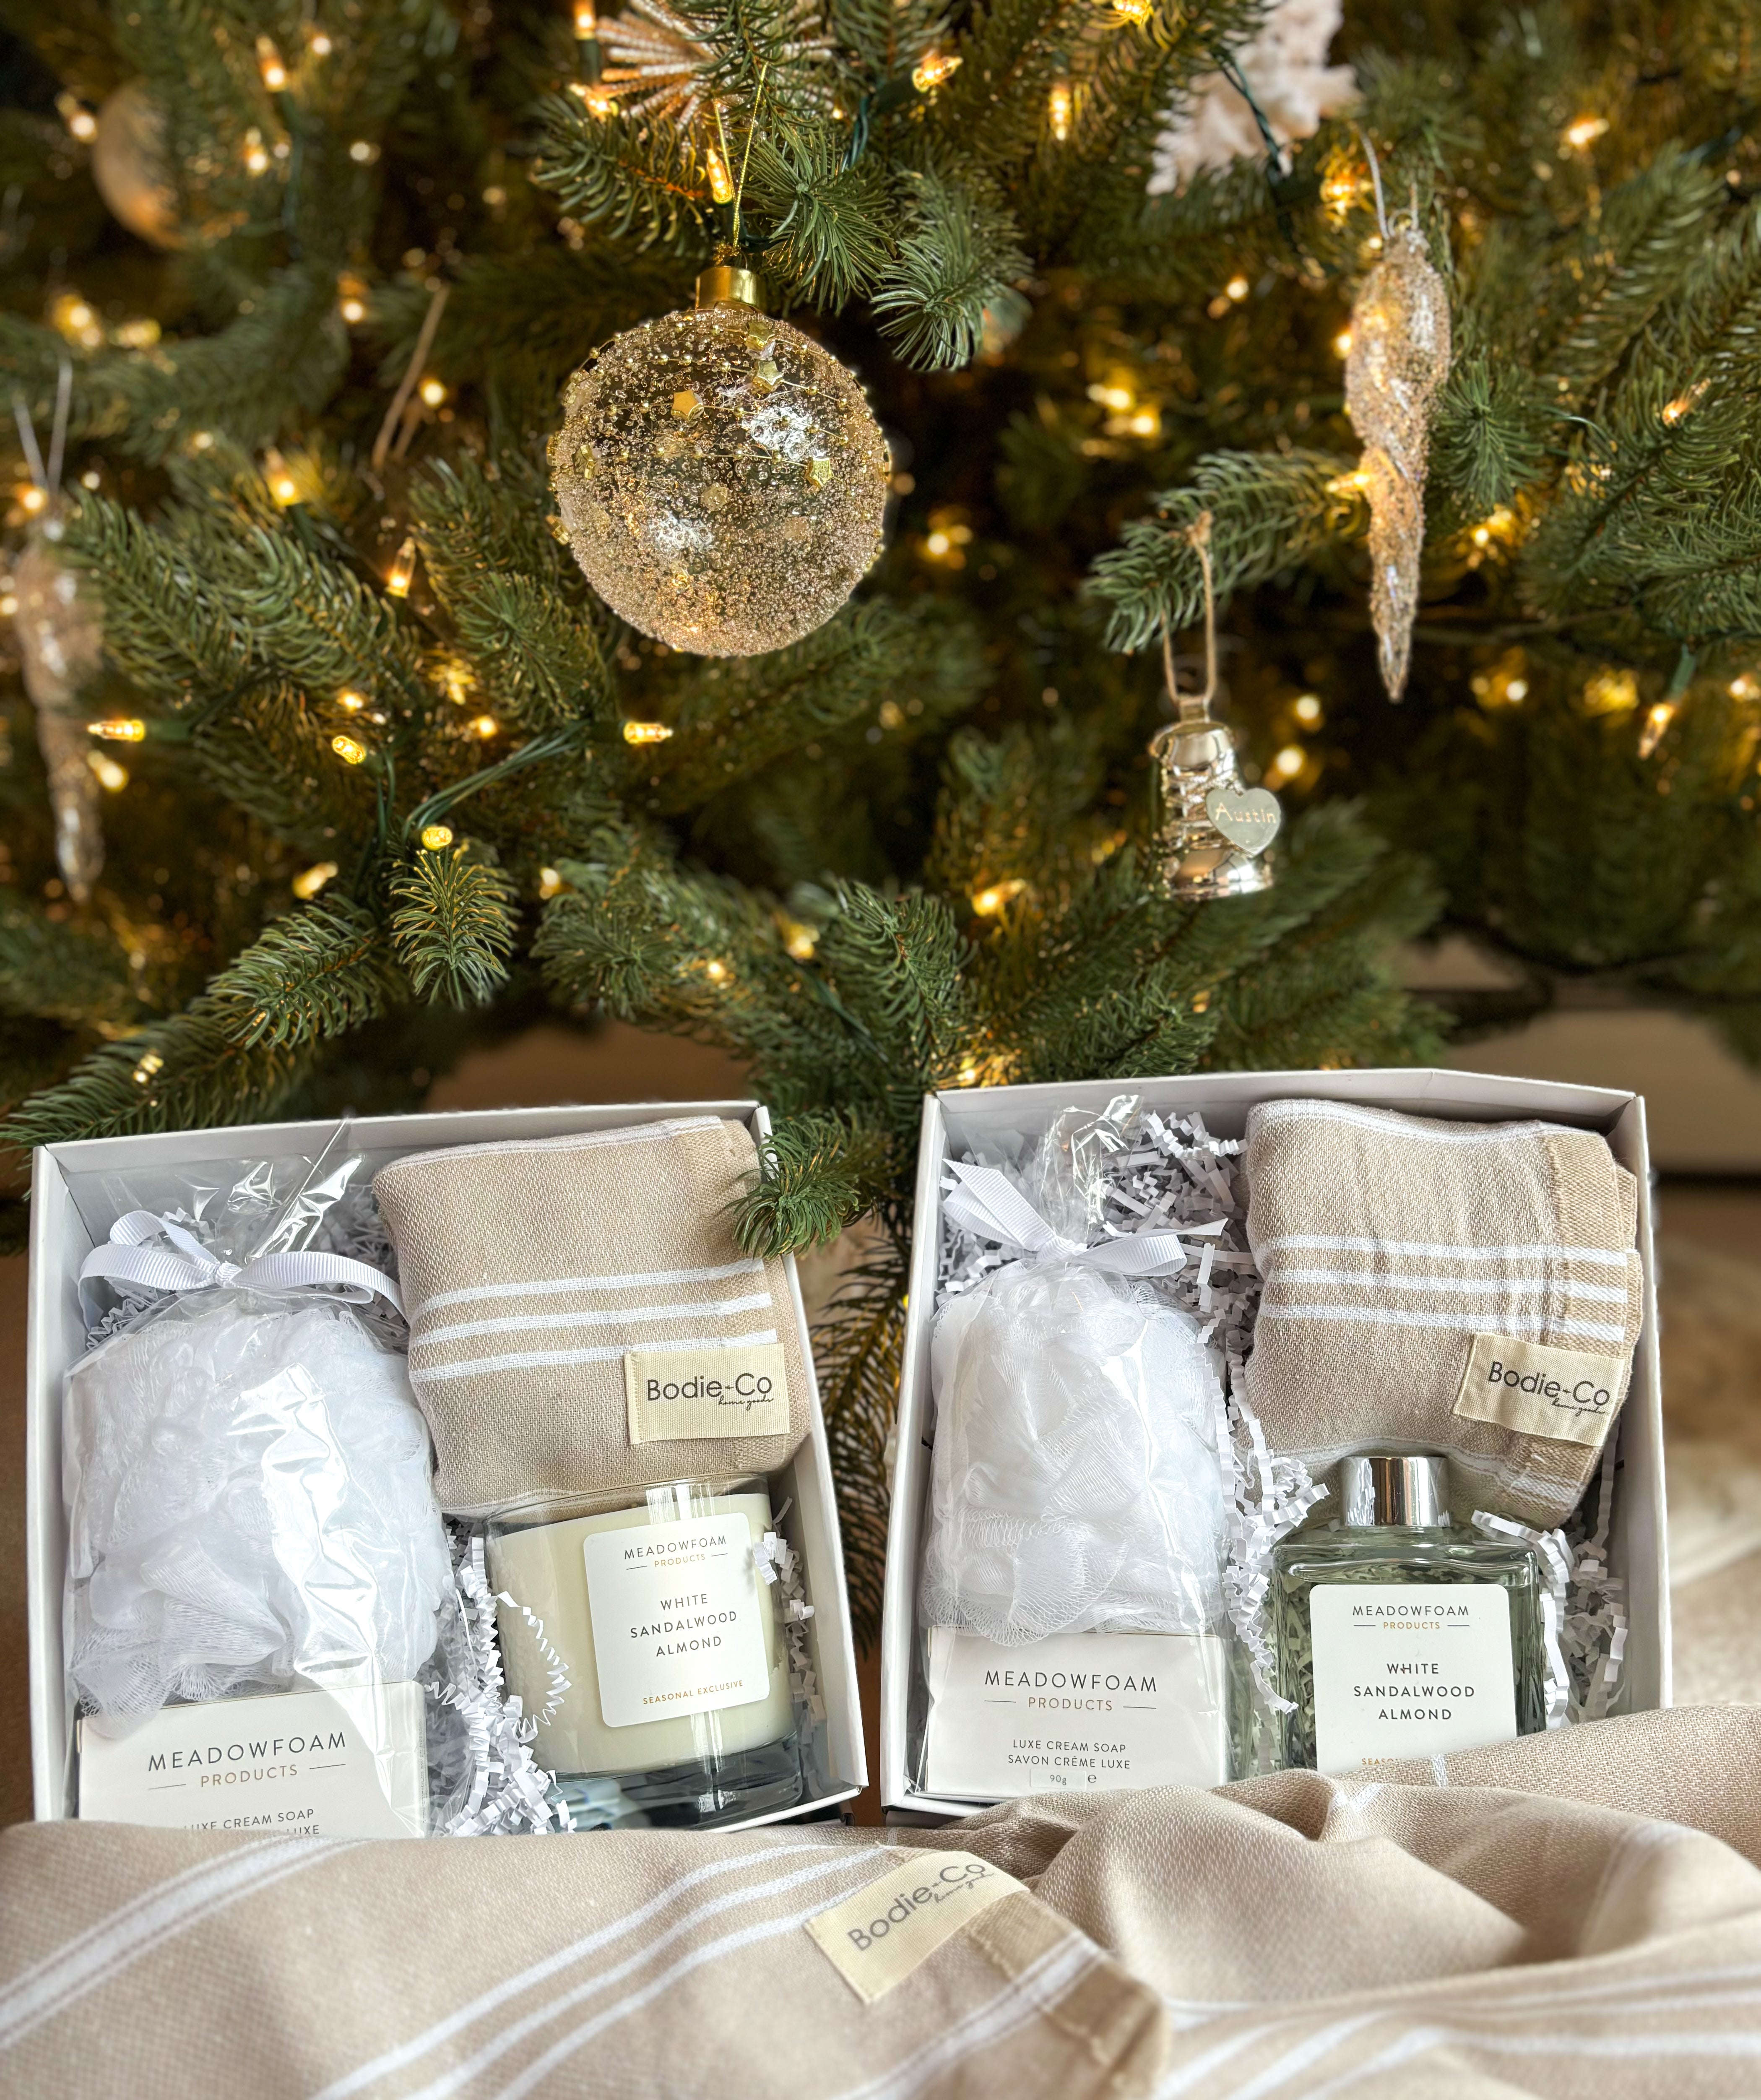 Bodie Gift Boxes: White Sandalwood Almond- In Support of BabyGoRound